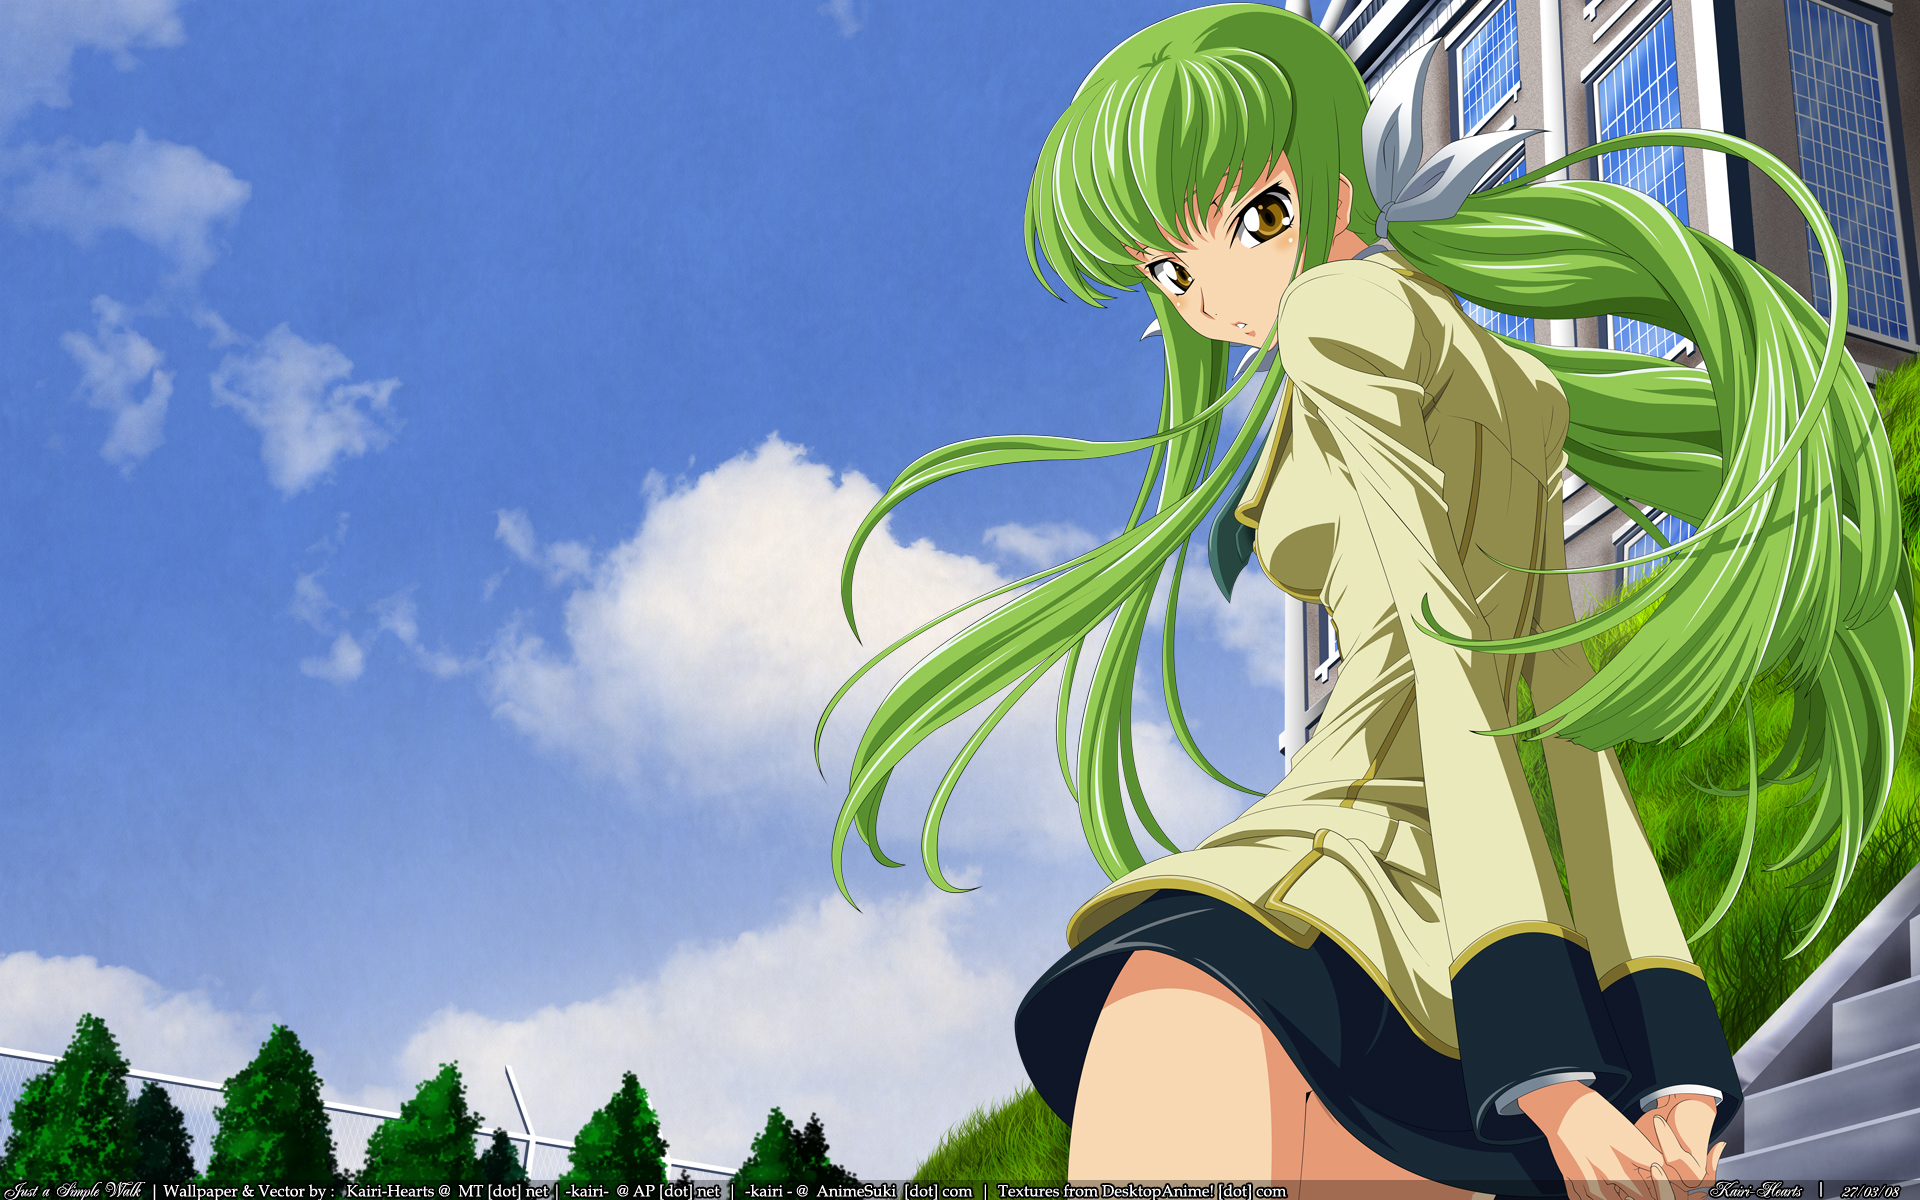 Free Download Wallpaper Cc From Code Geass Wallpaper 19x10 For Your Desktop Mobile Tablet Explore 50 C I A Wallpapers Cia Logo Wallpaper The Used Wallpaper Cia Wallpaper Hd